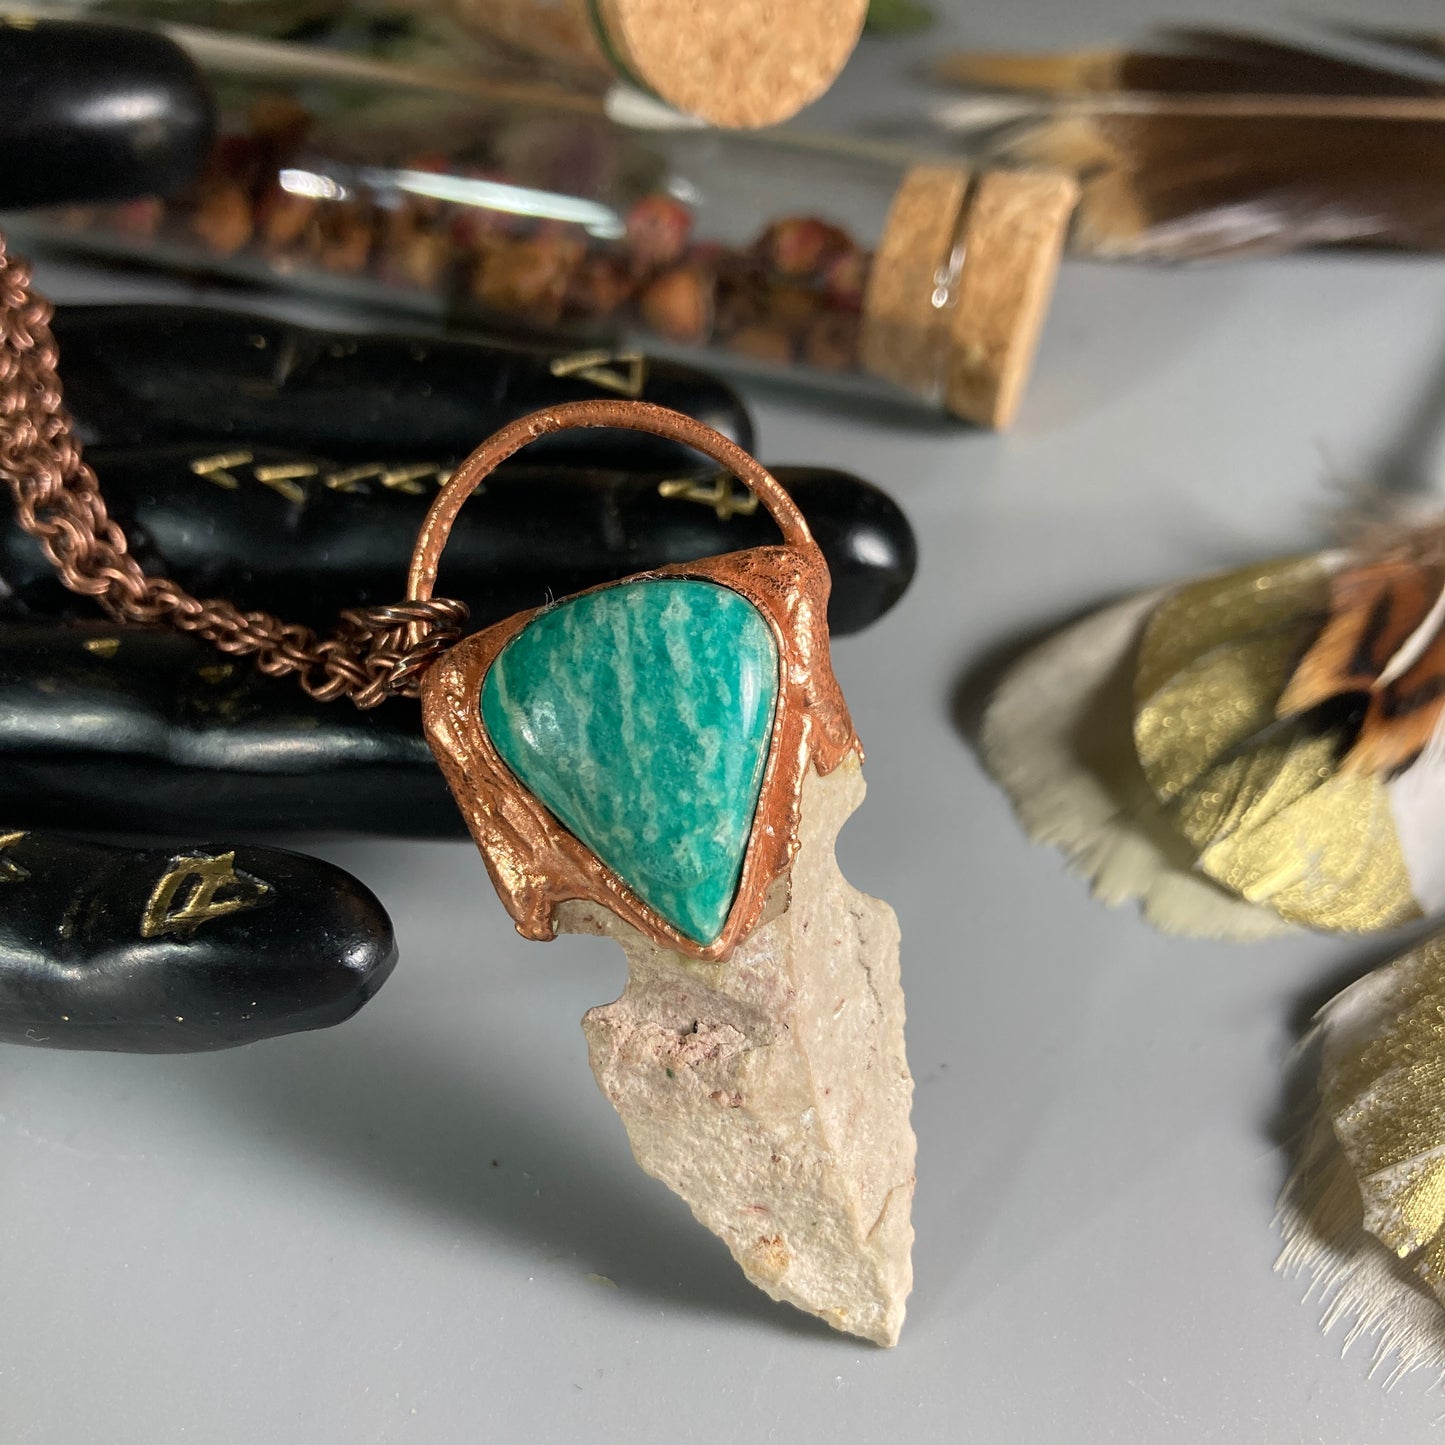 Ancient Relic Necklace ۞ Electrofomed Amazonite Crystal Pendant